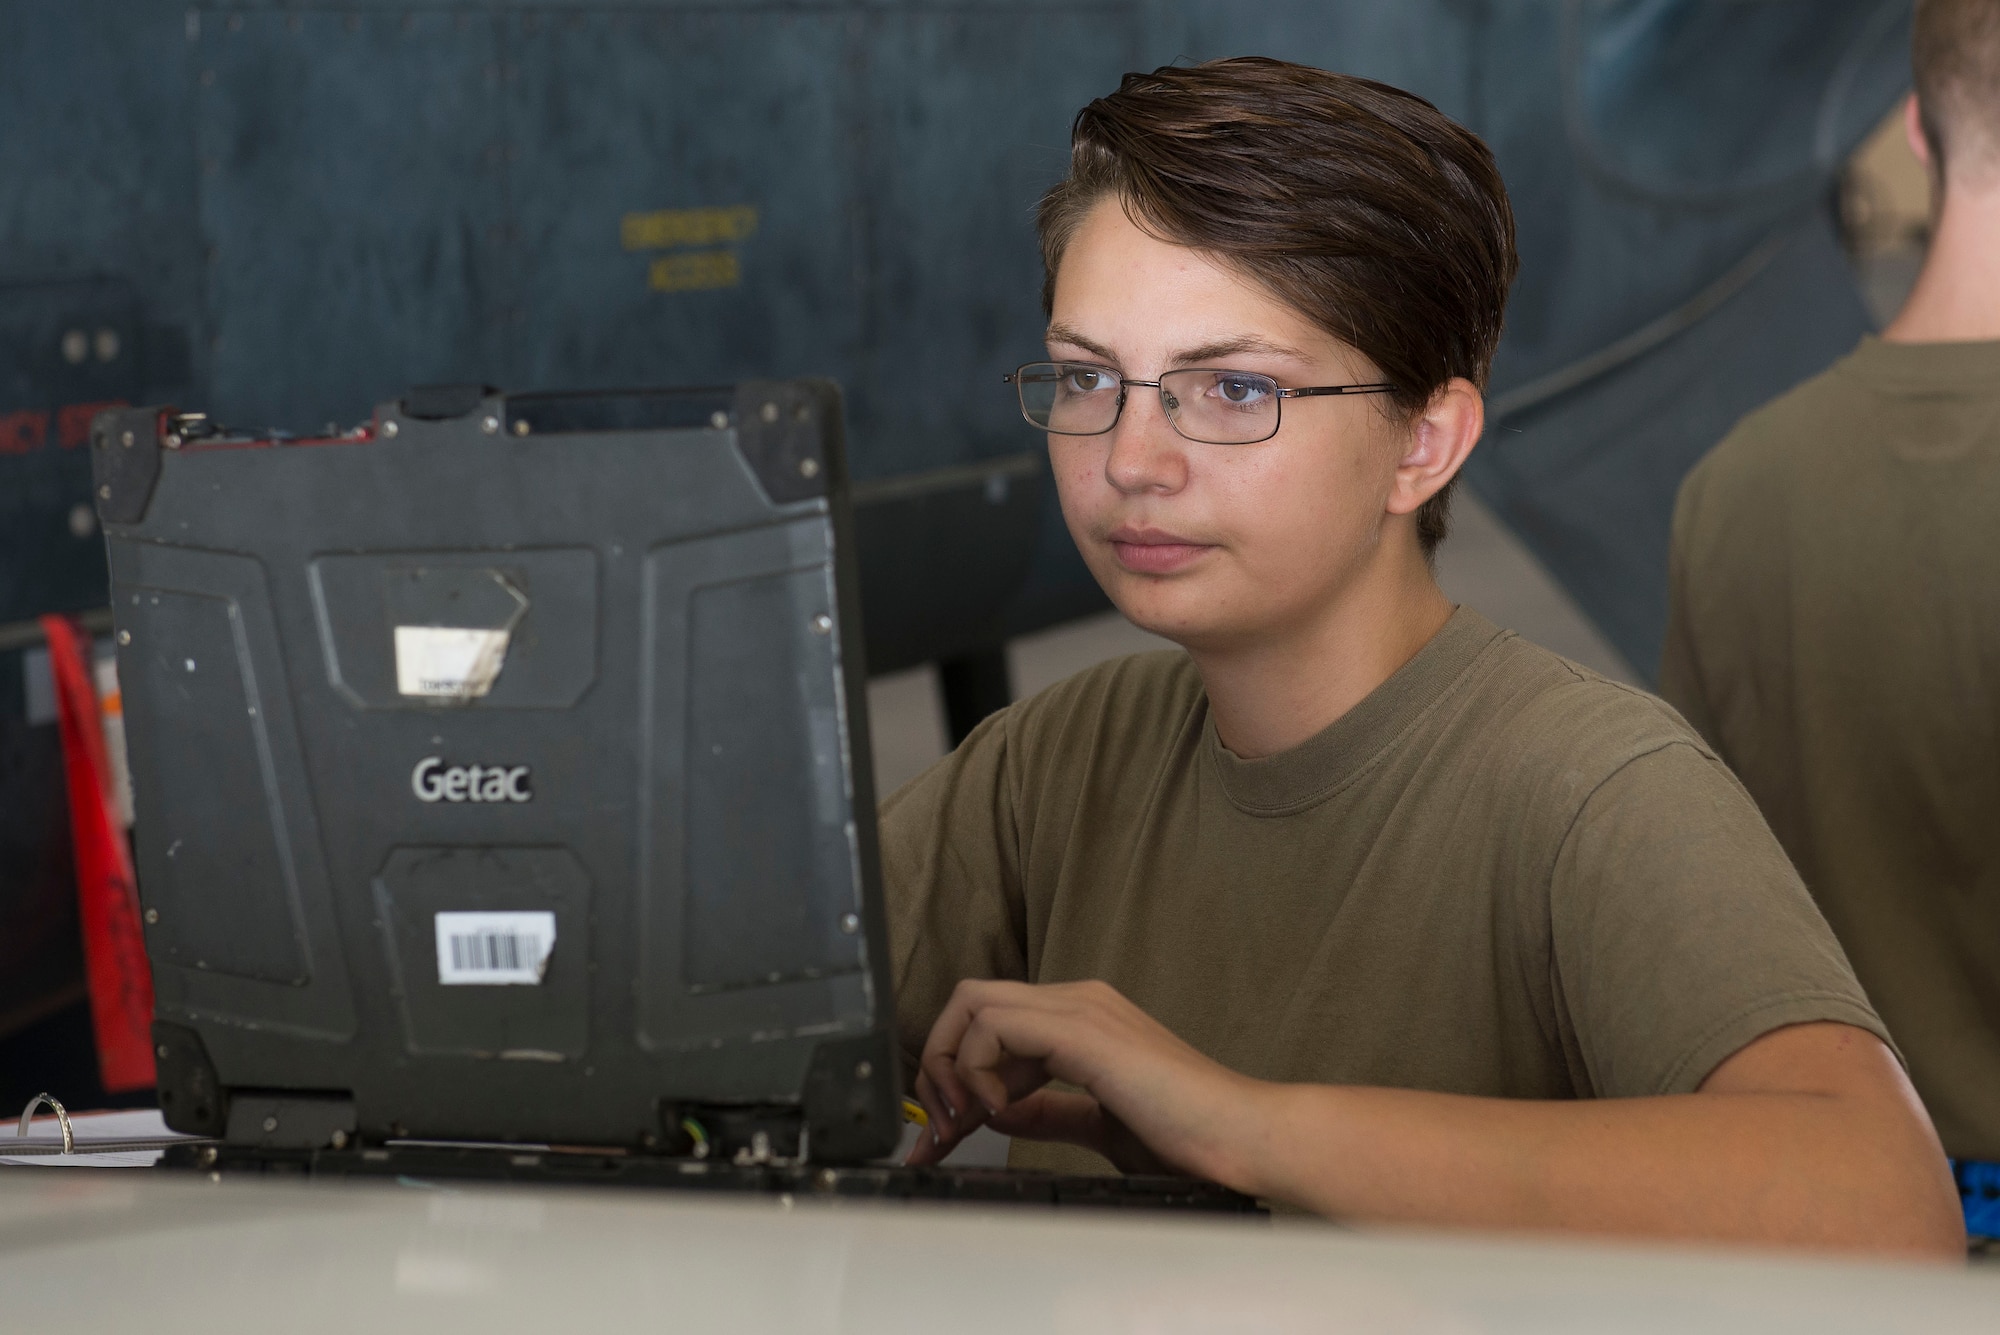 U.S. Air Force Airman 1st Class Krystal Adamson, 380th Expeditionary Aircraft Maintenance Squadron crew chief, reviews technical orders during routine maintenance on an RQ-4 Global Hawk unmanned aerial vehicle at Al Dhafra Air Base, United Arab Emirates, Nov. 3, 2020.